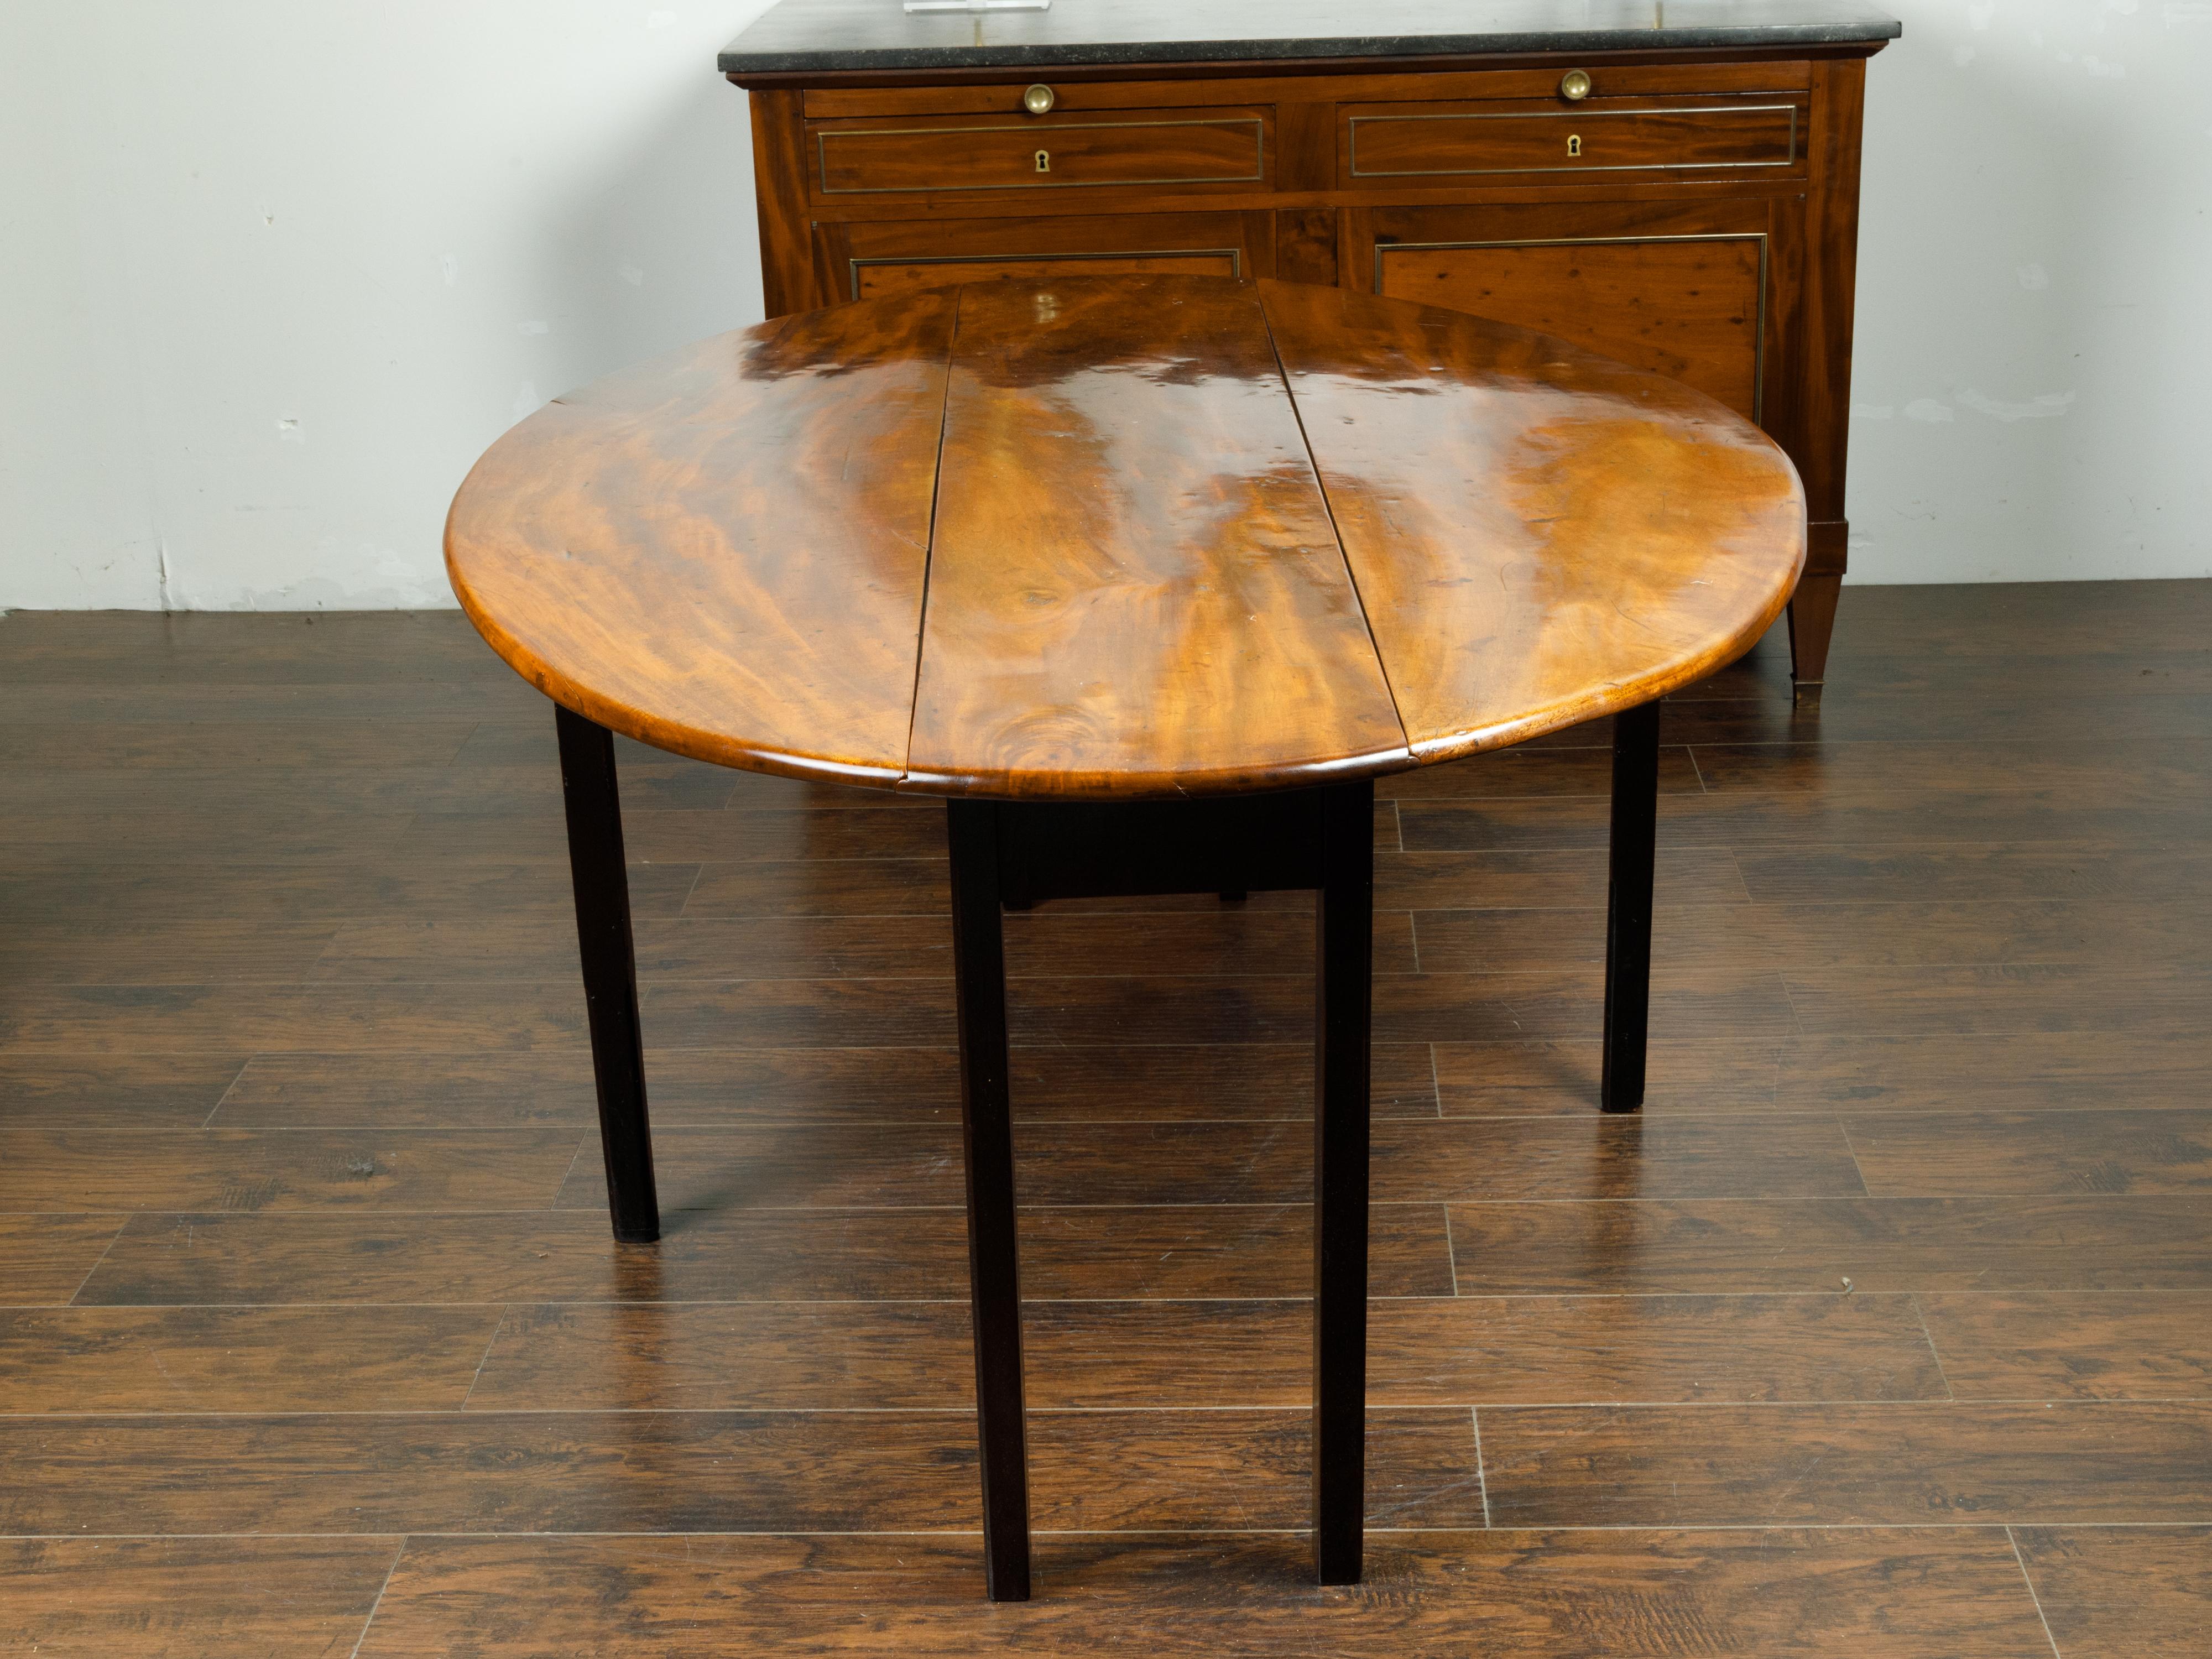 English 1820s Mahogany Drop Leaf Dining Table with Oval Top and Ebonized Legs 2